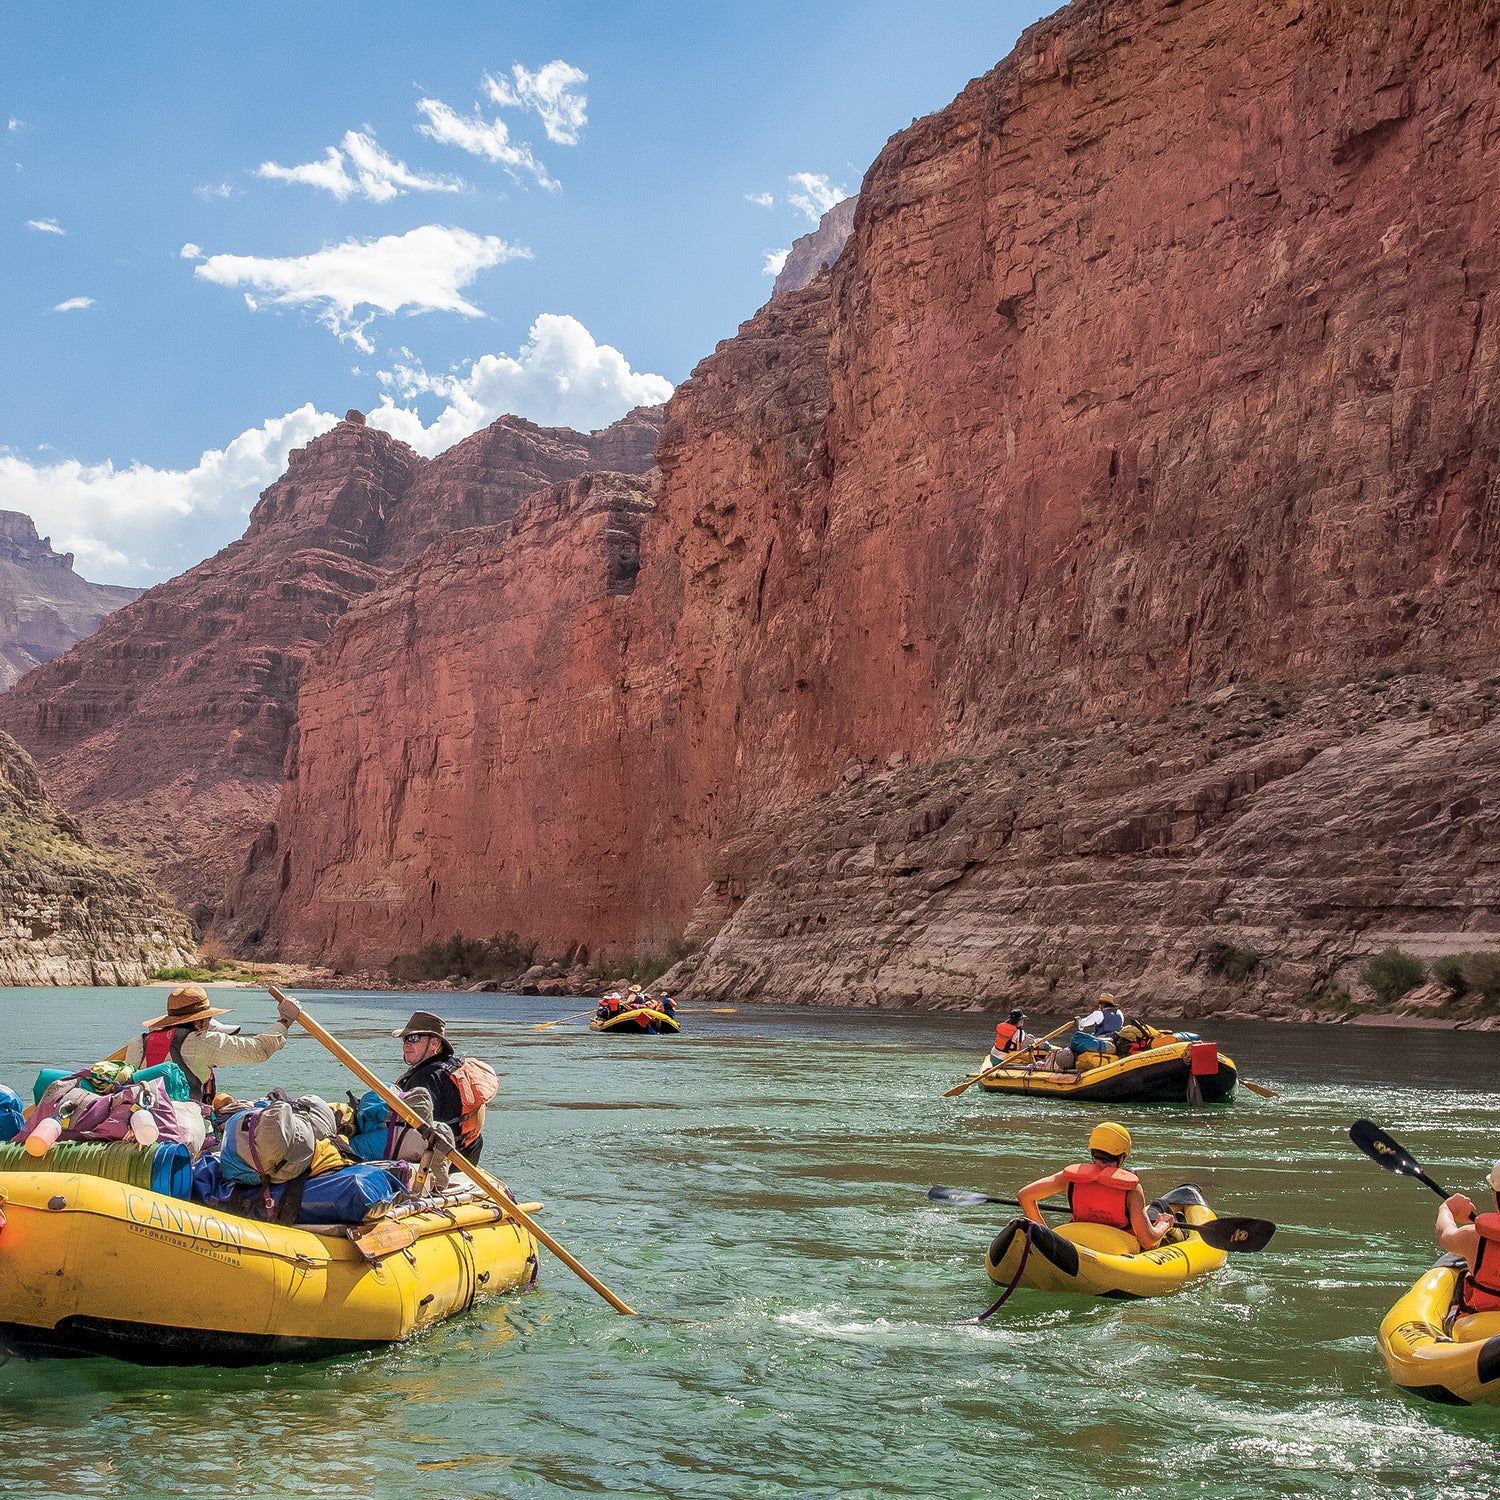 What Do I Pack for River Rafting?